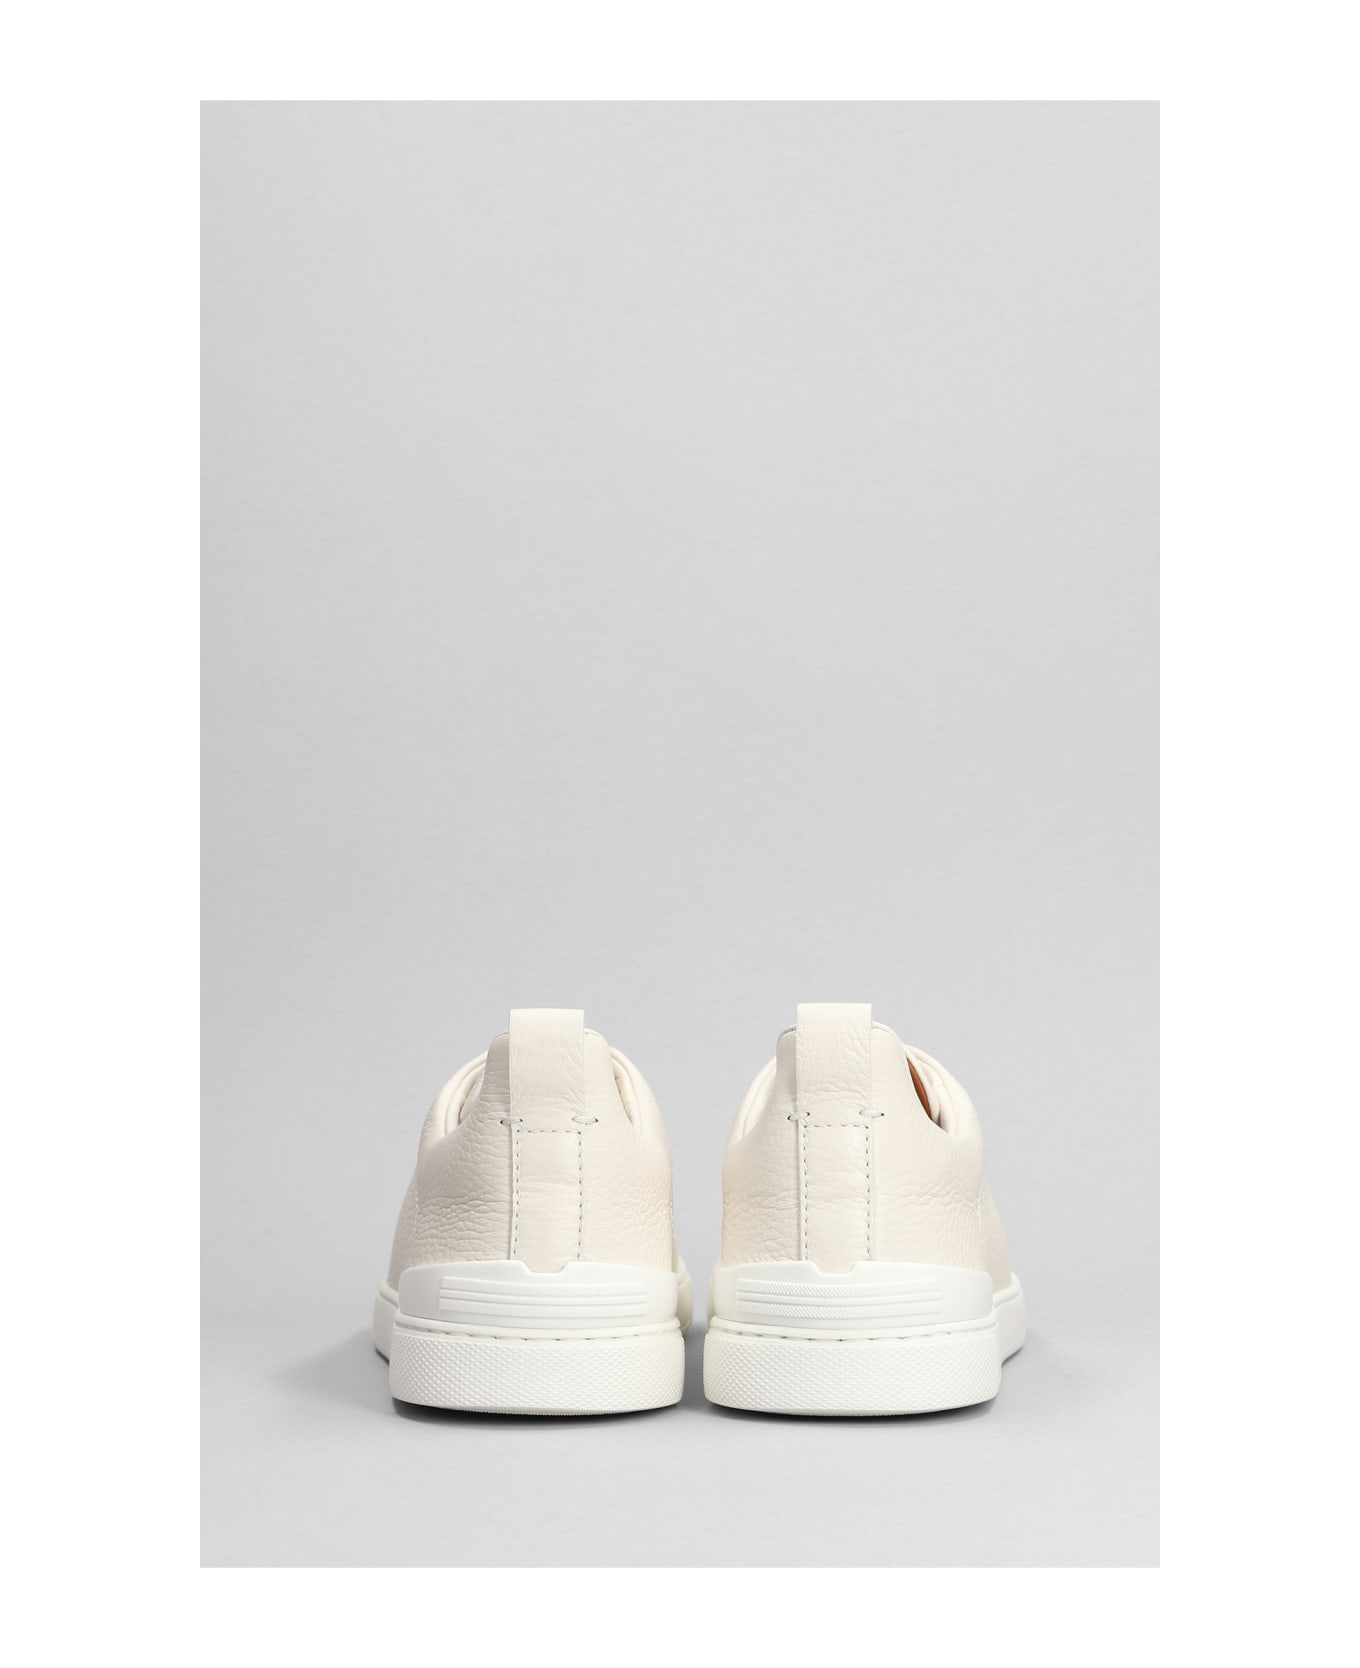 Zegna Triple Stich Sneakers In White Leather - white スニーカー